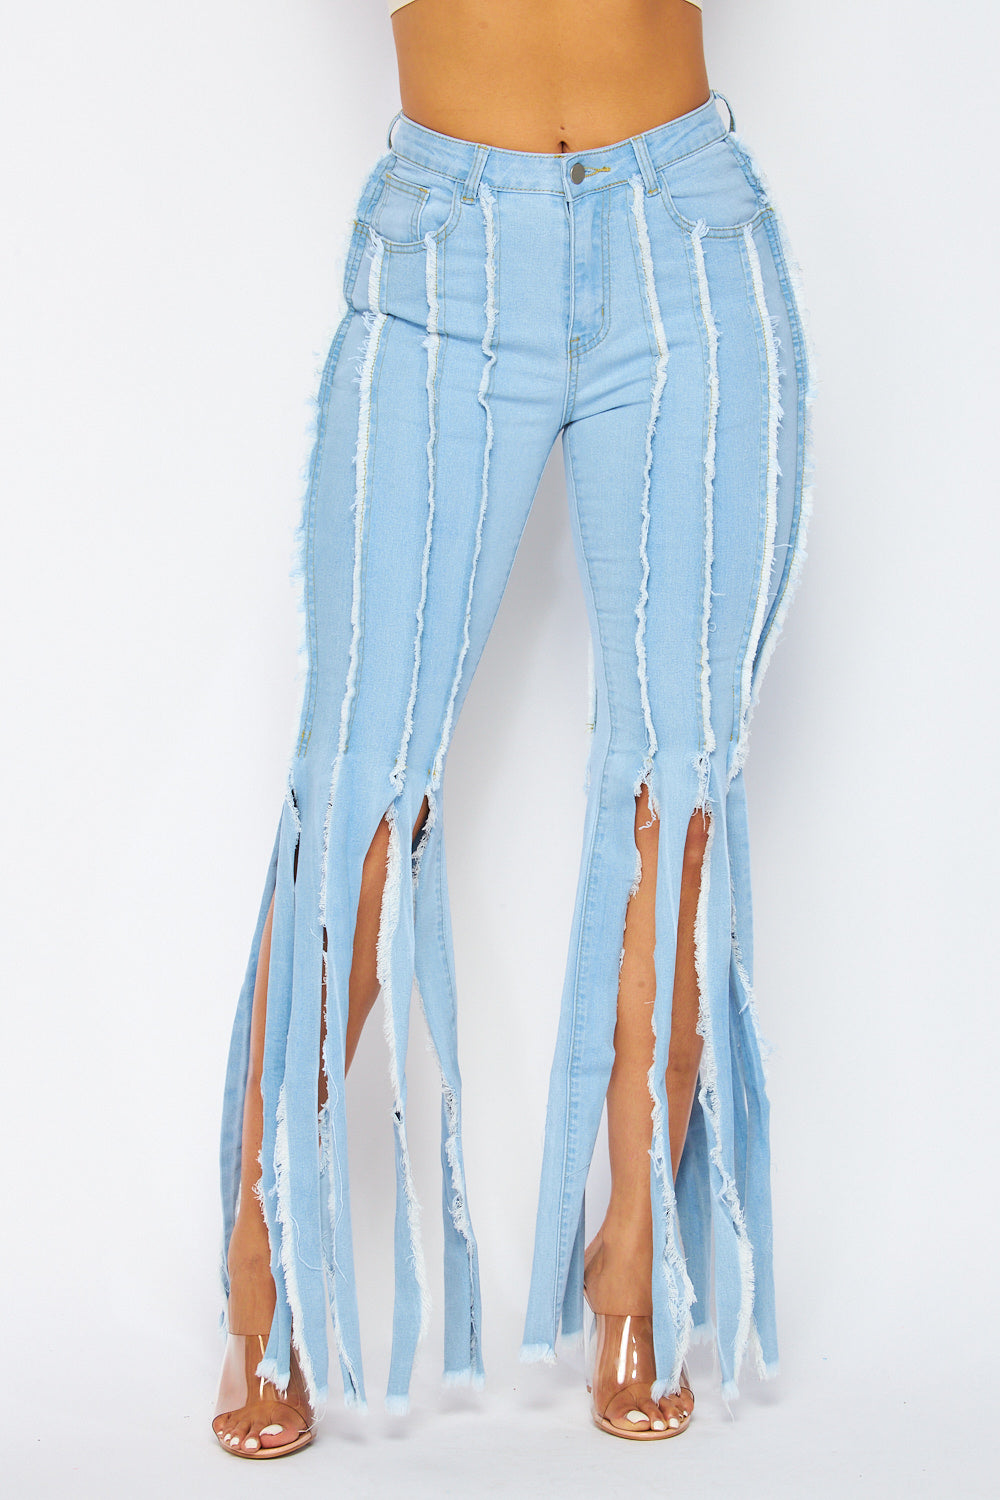 Spill The Tea Distressed Frayed Denim Jeans Pants